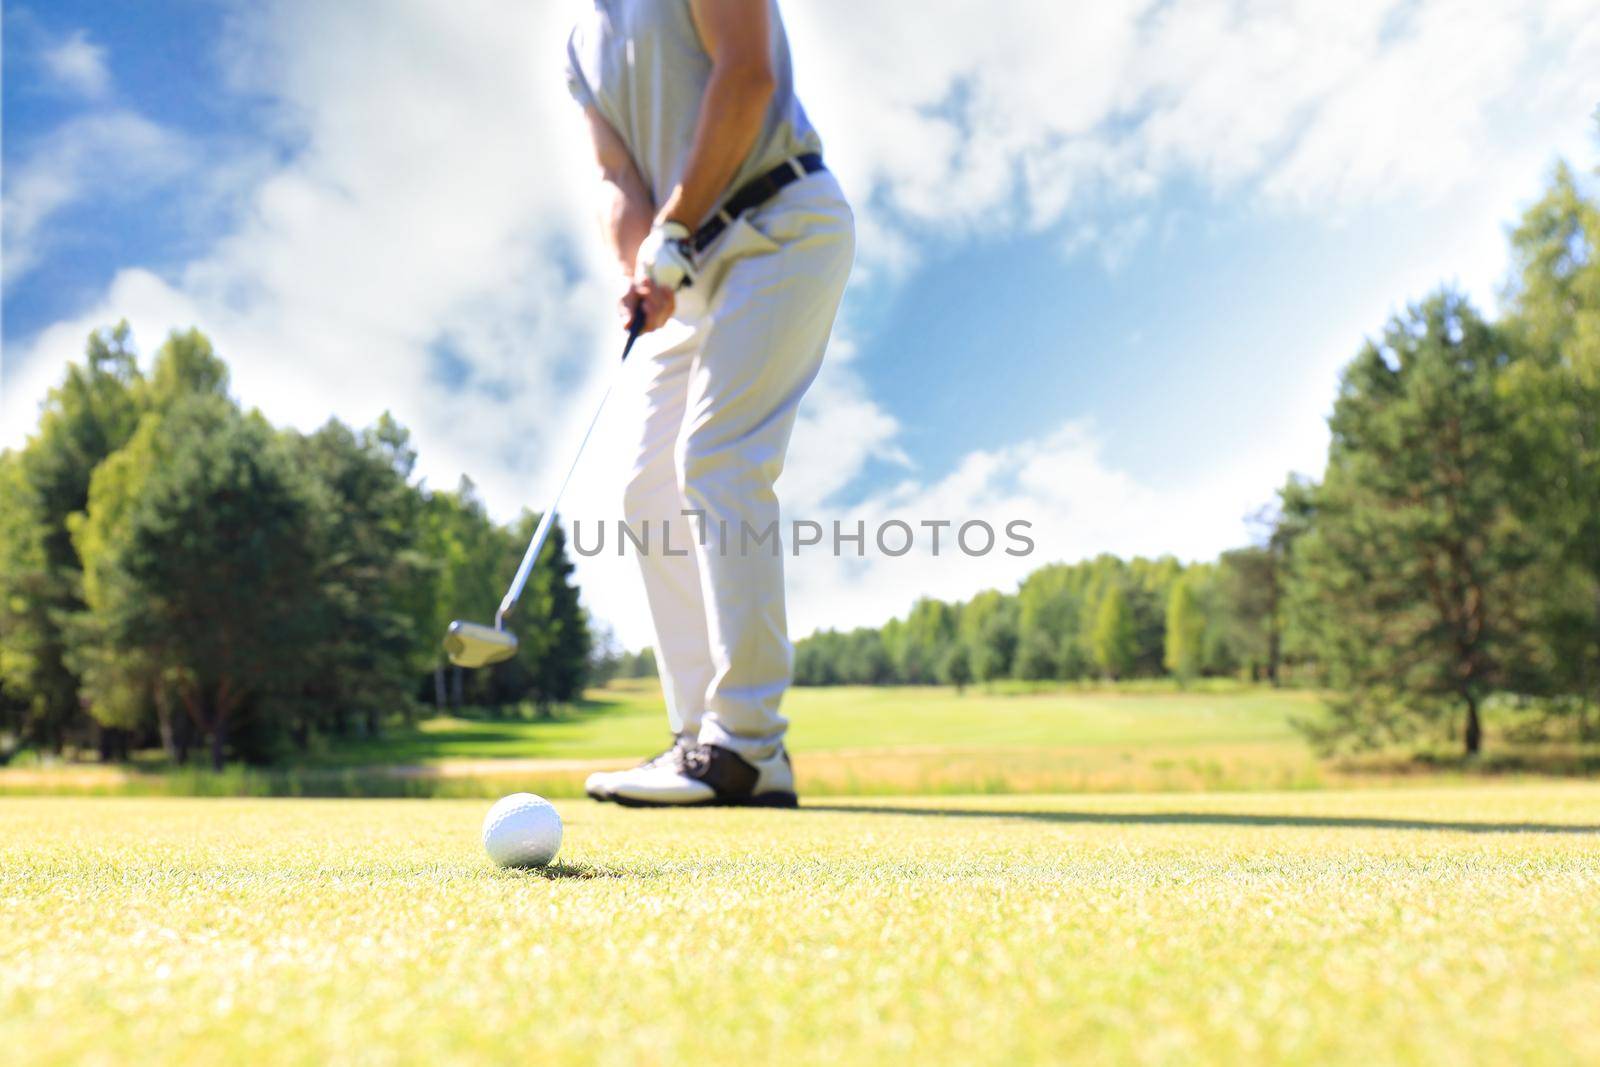 Golf approach shot with iron from fairway at sunny day. by tsyhun